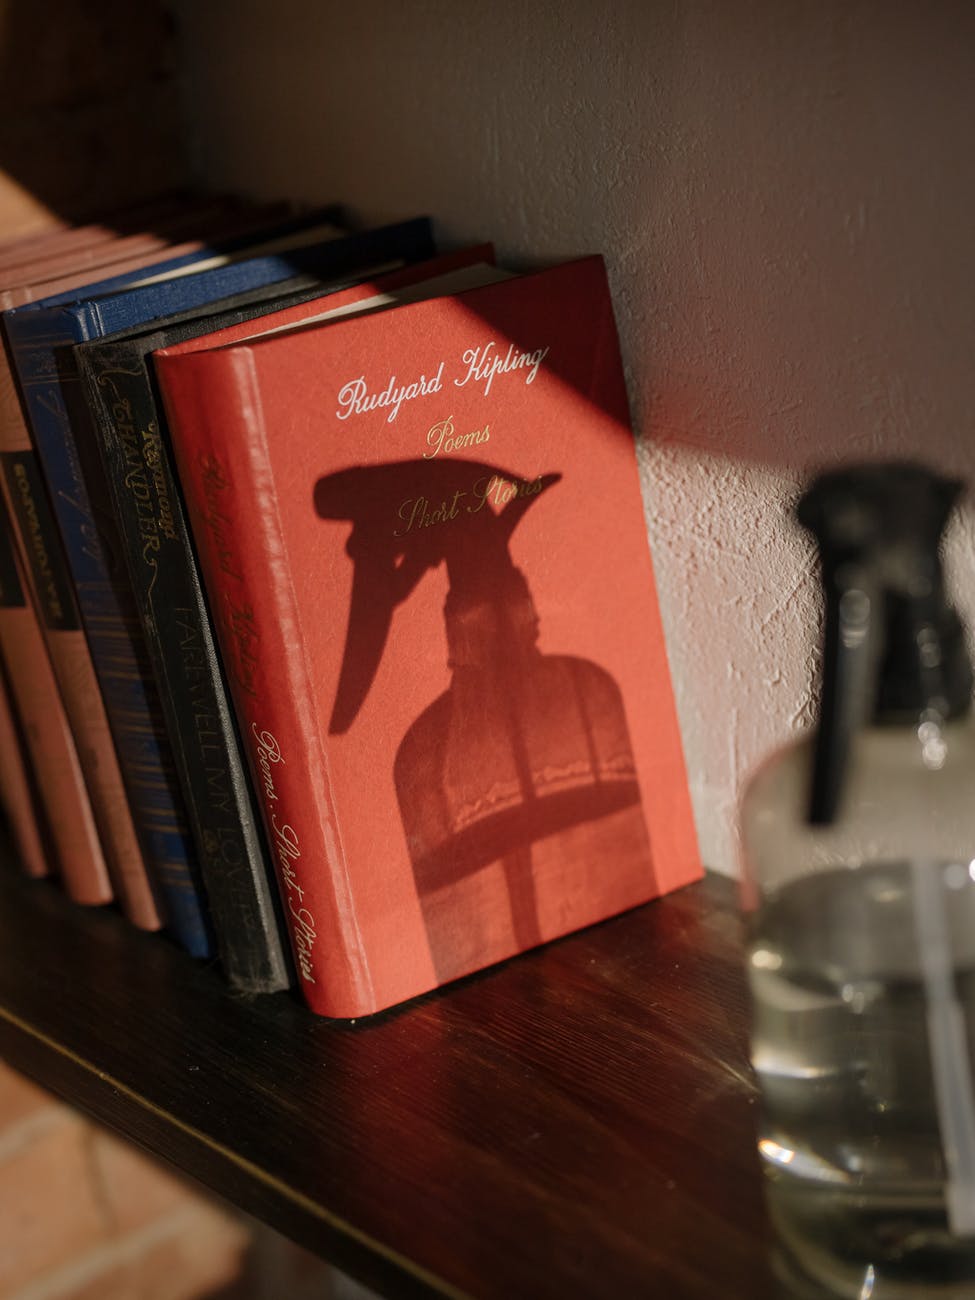 red and black book on brown wooden table